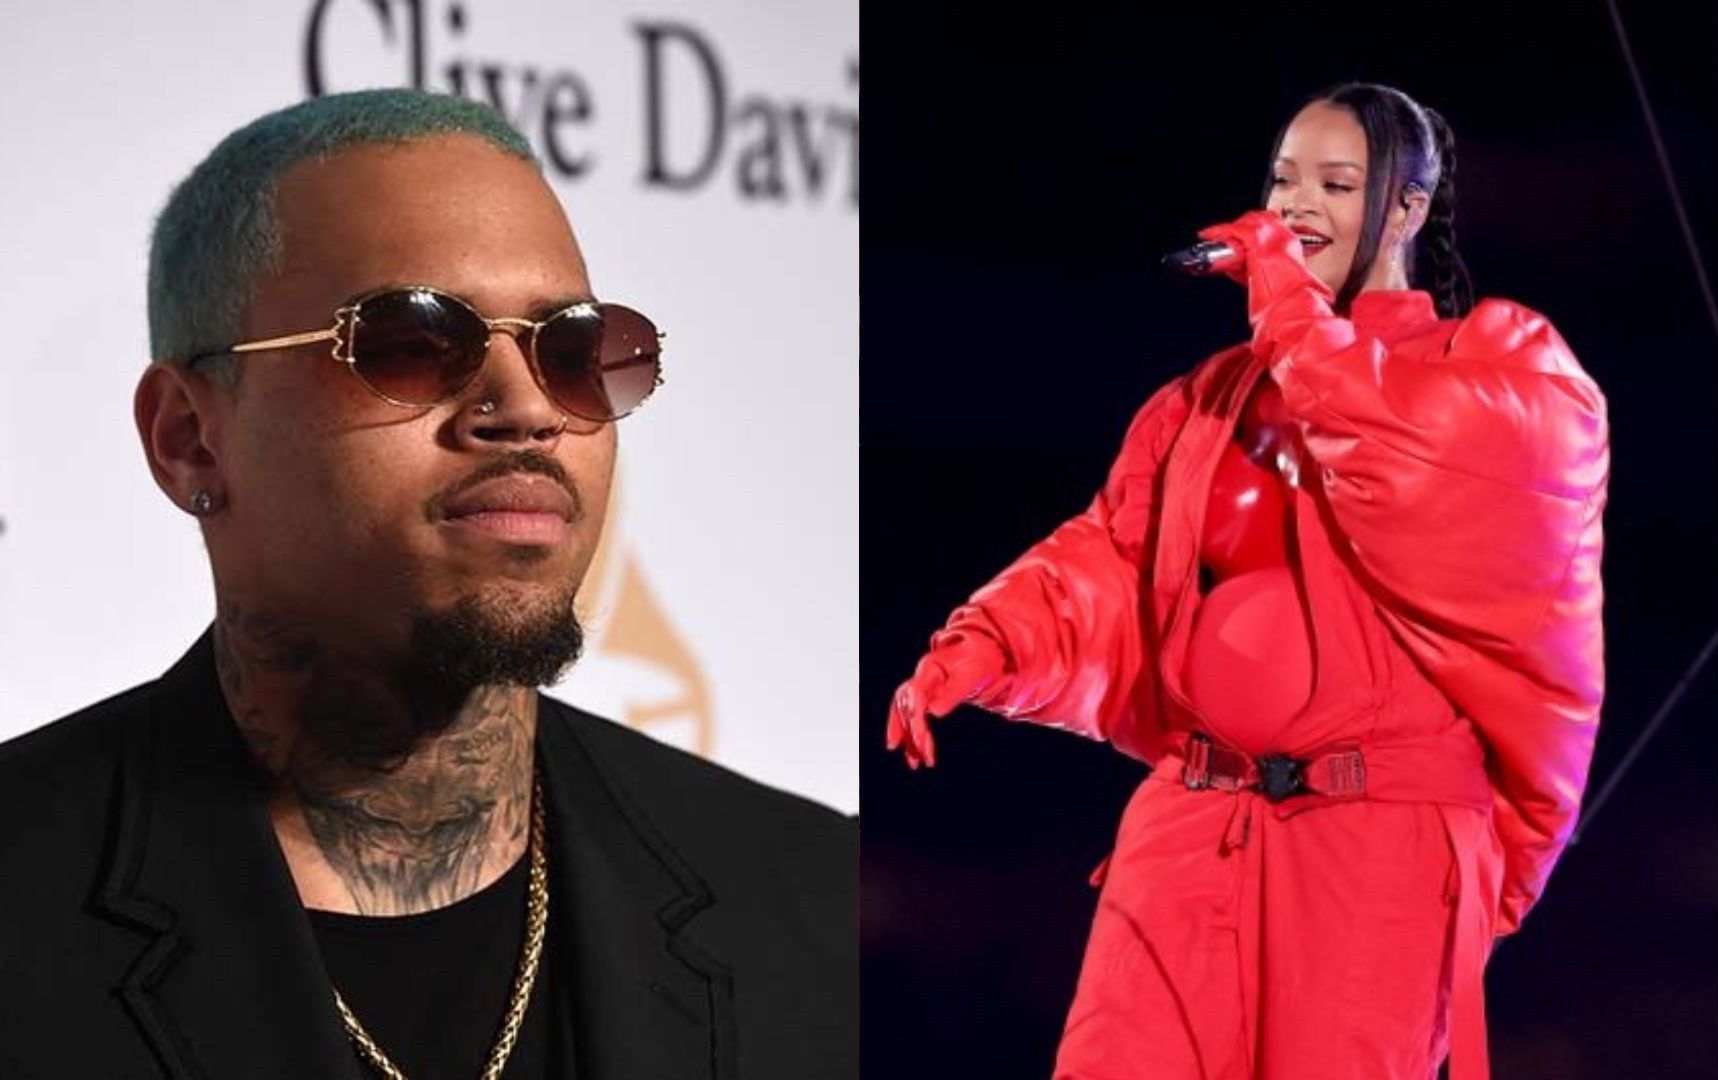 Go Girl Chris Brown shows support for ex Rihanna after Super Bowl ...